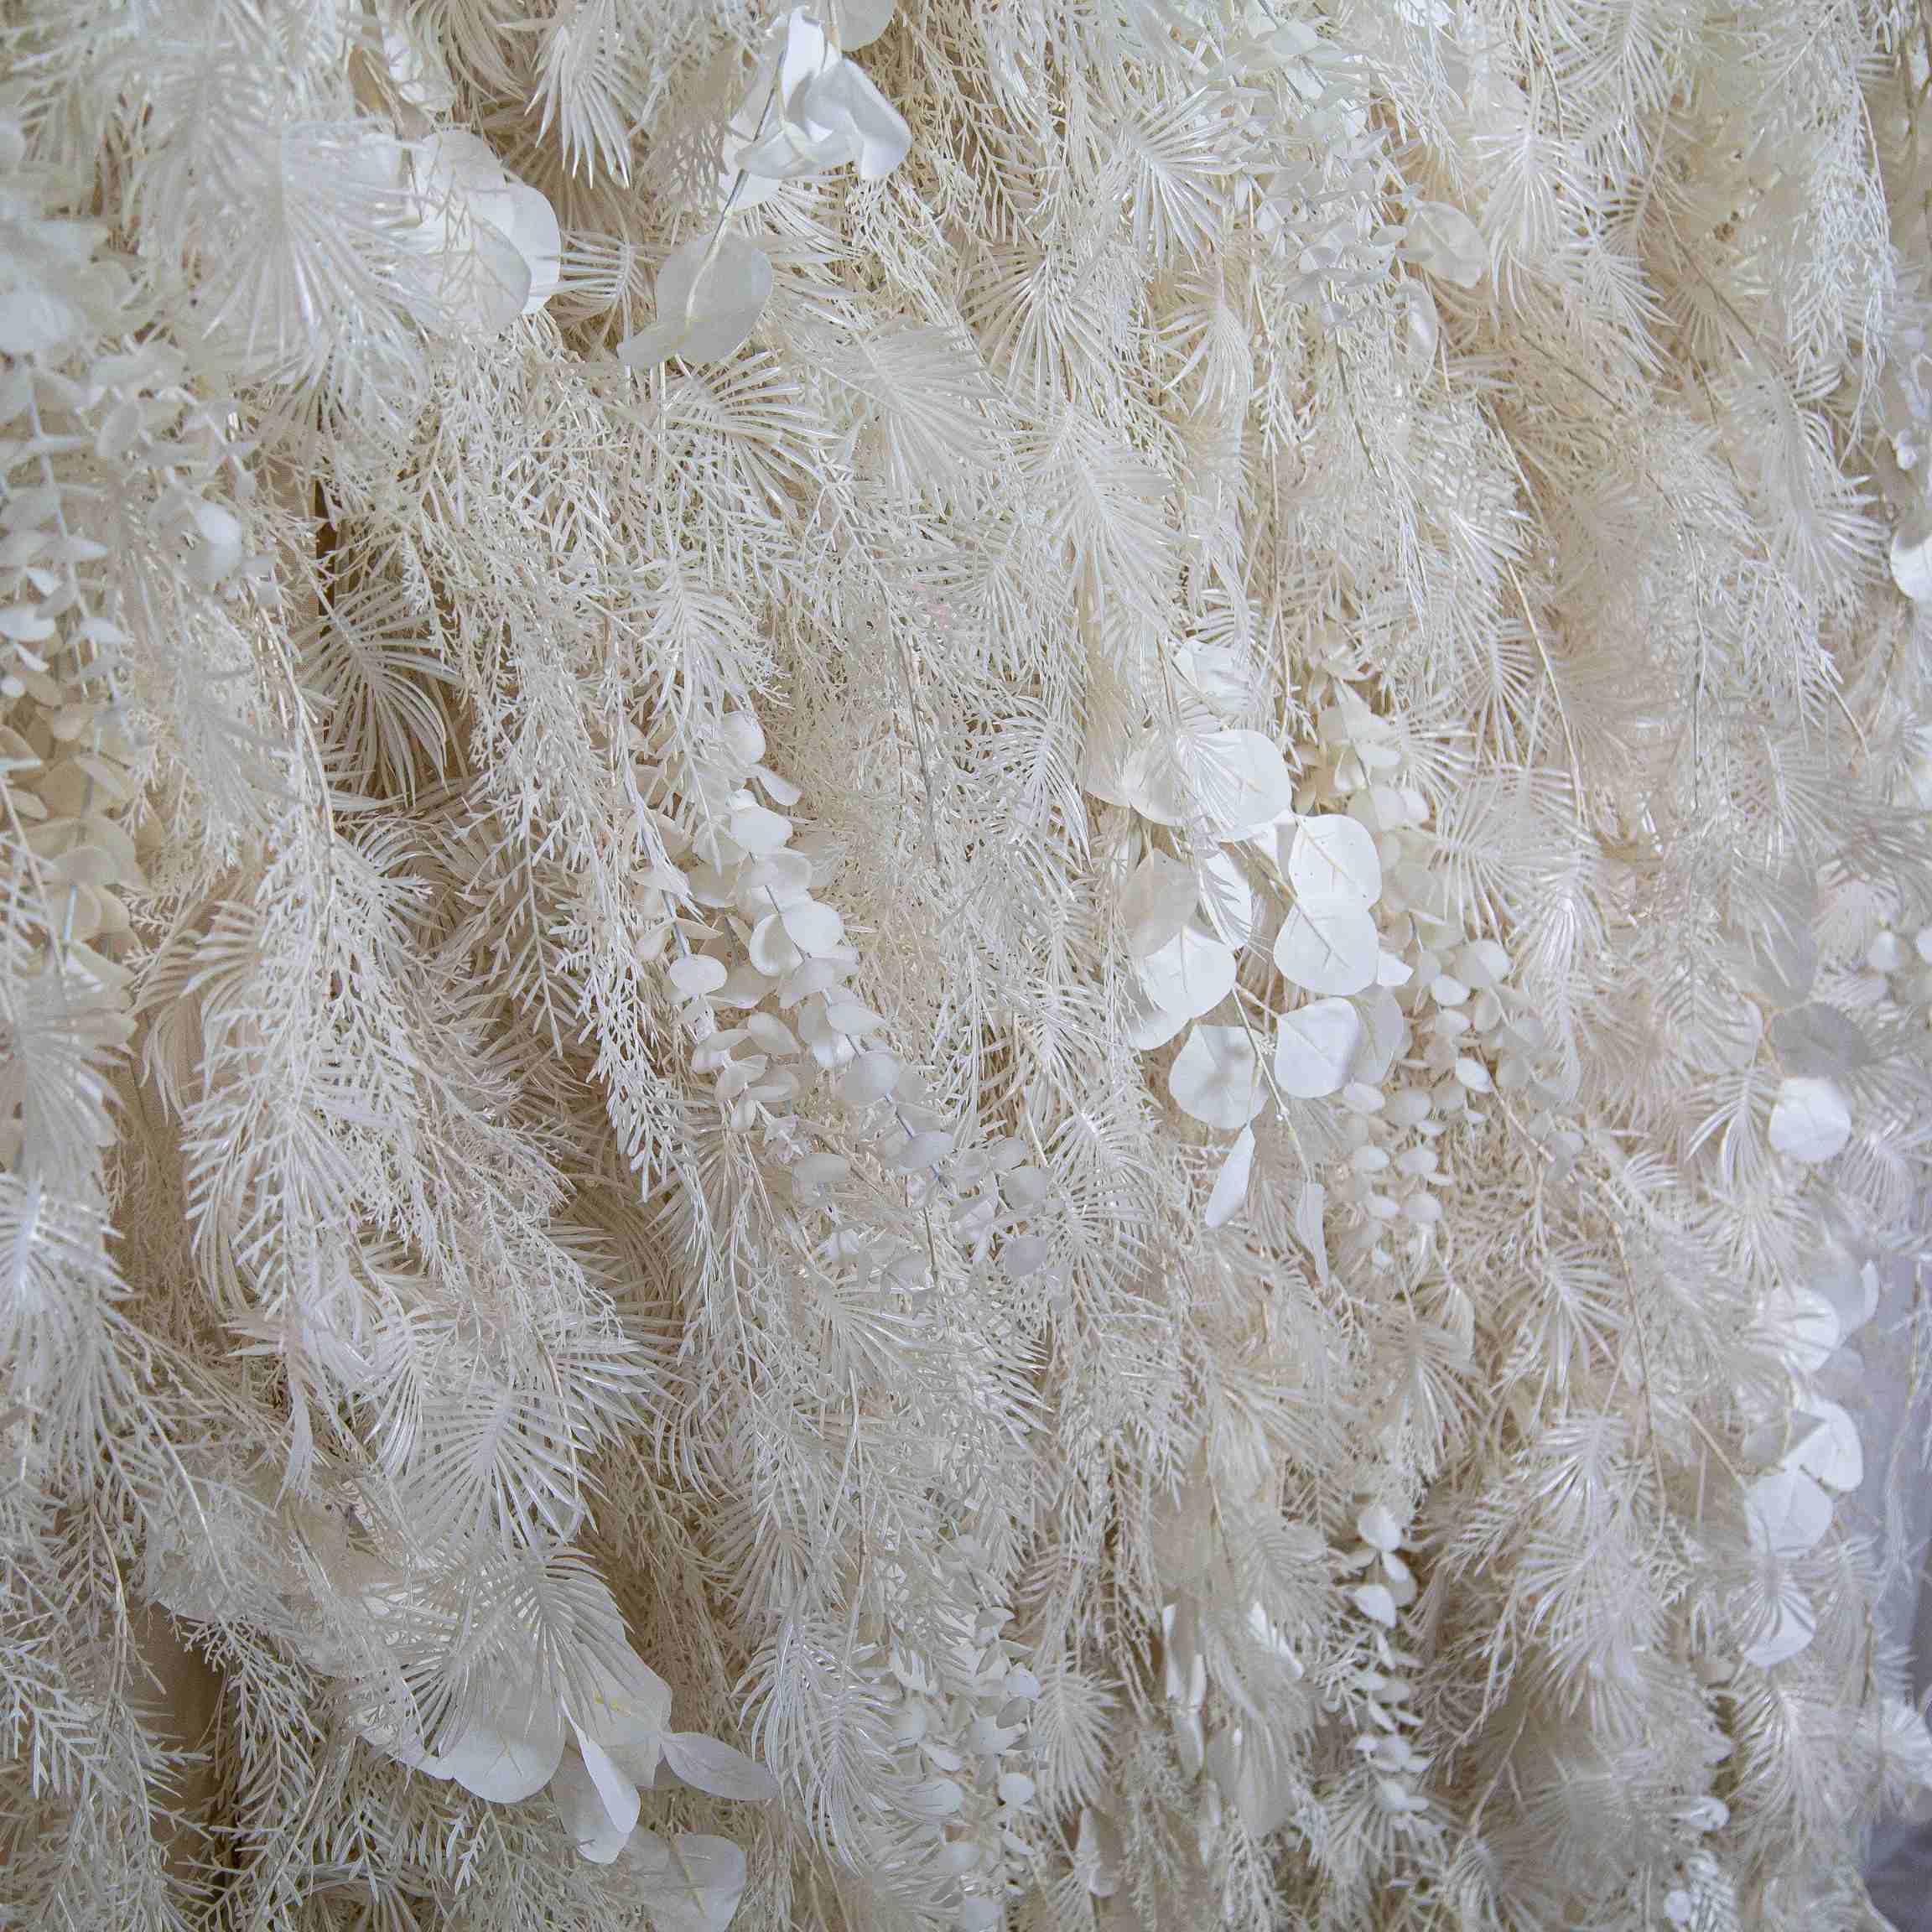 The white pampas fabric artificial flower wall